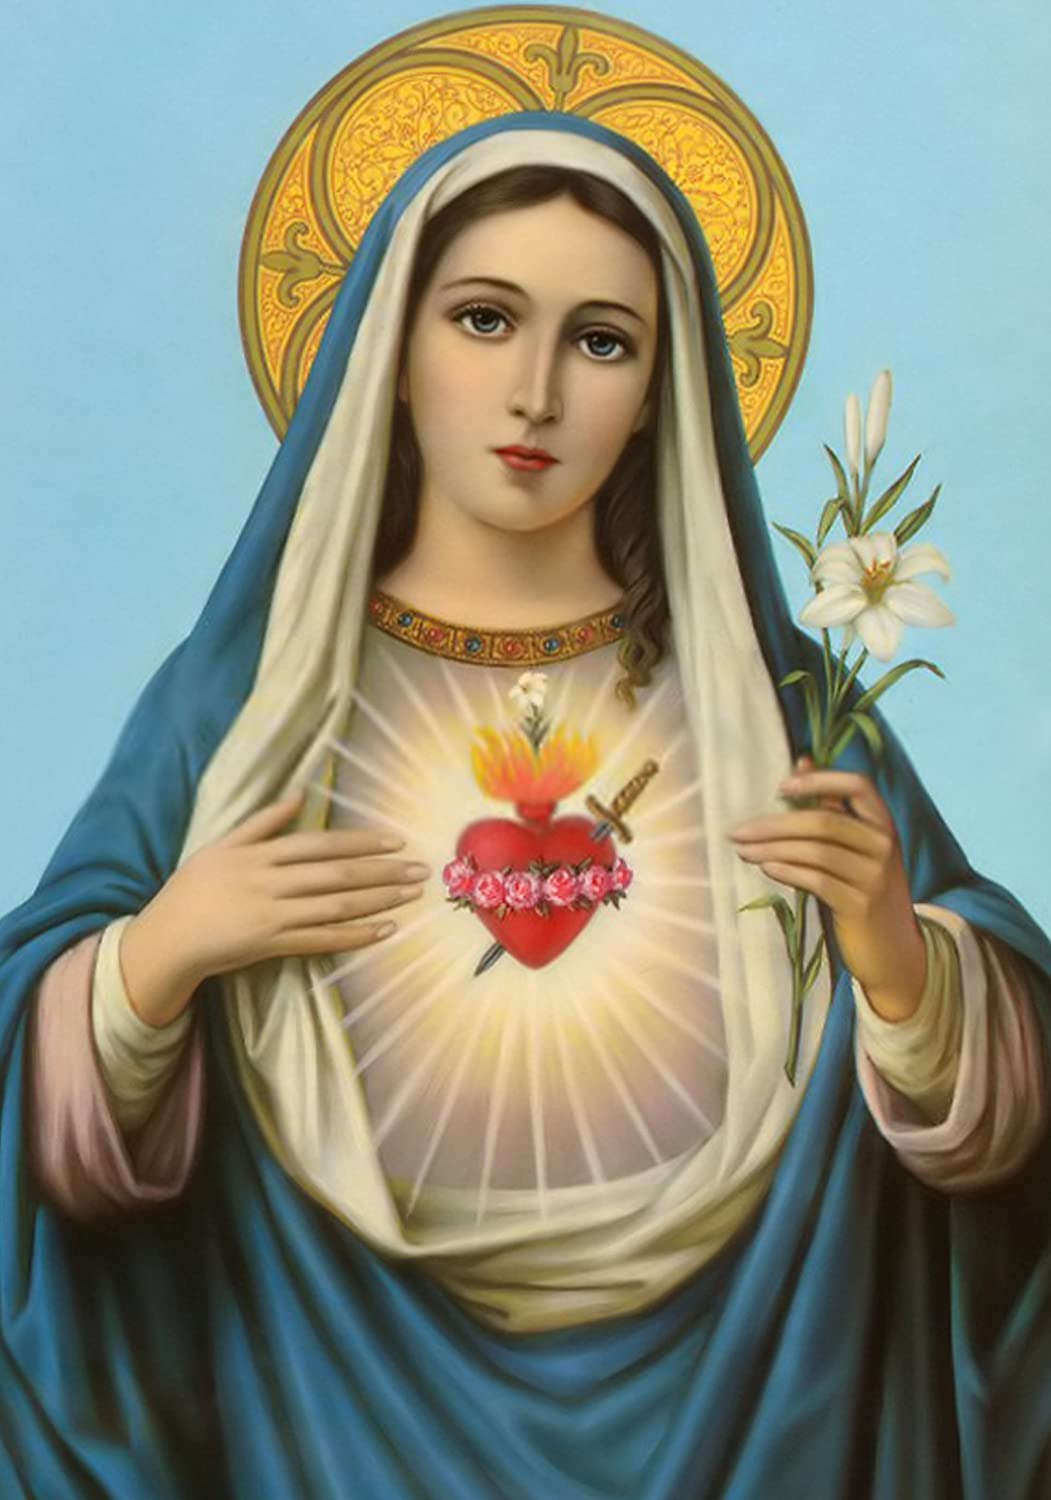 Immaculate Heart Of Mary POSTER Print A4 A3 Holy Virgin Mary Image Blessed Mother Picture Catholic Religious Wall Art, Handmade Products